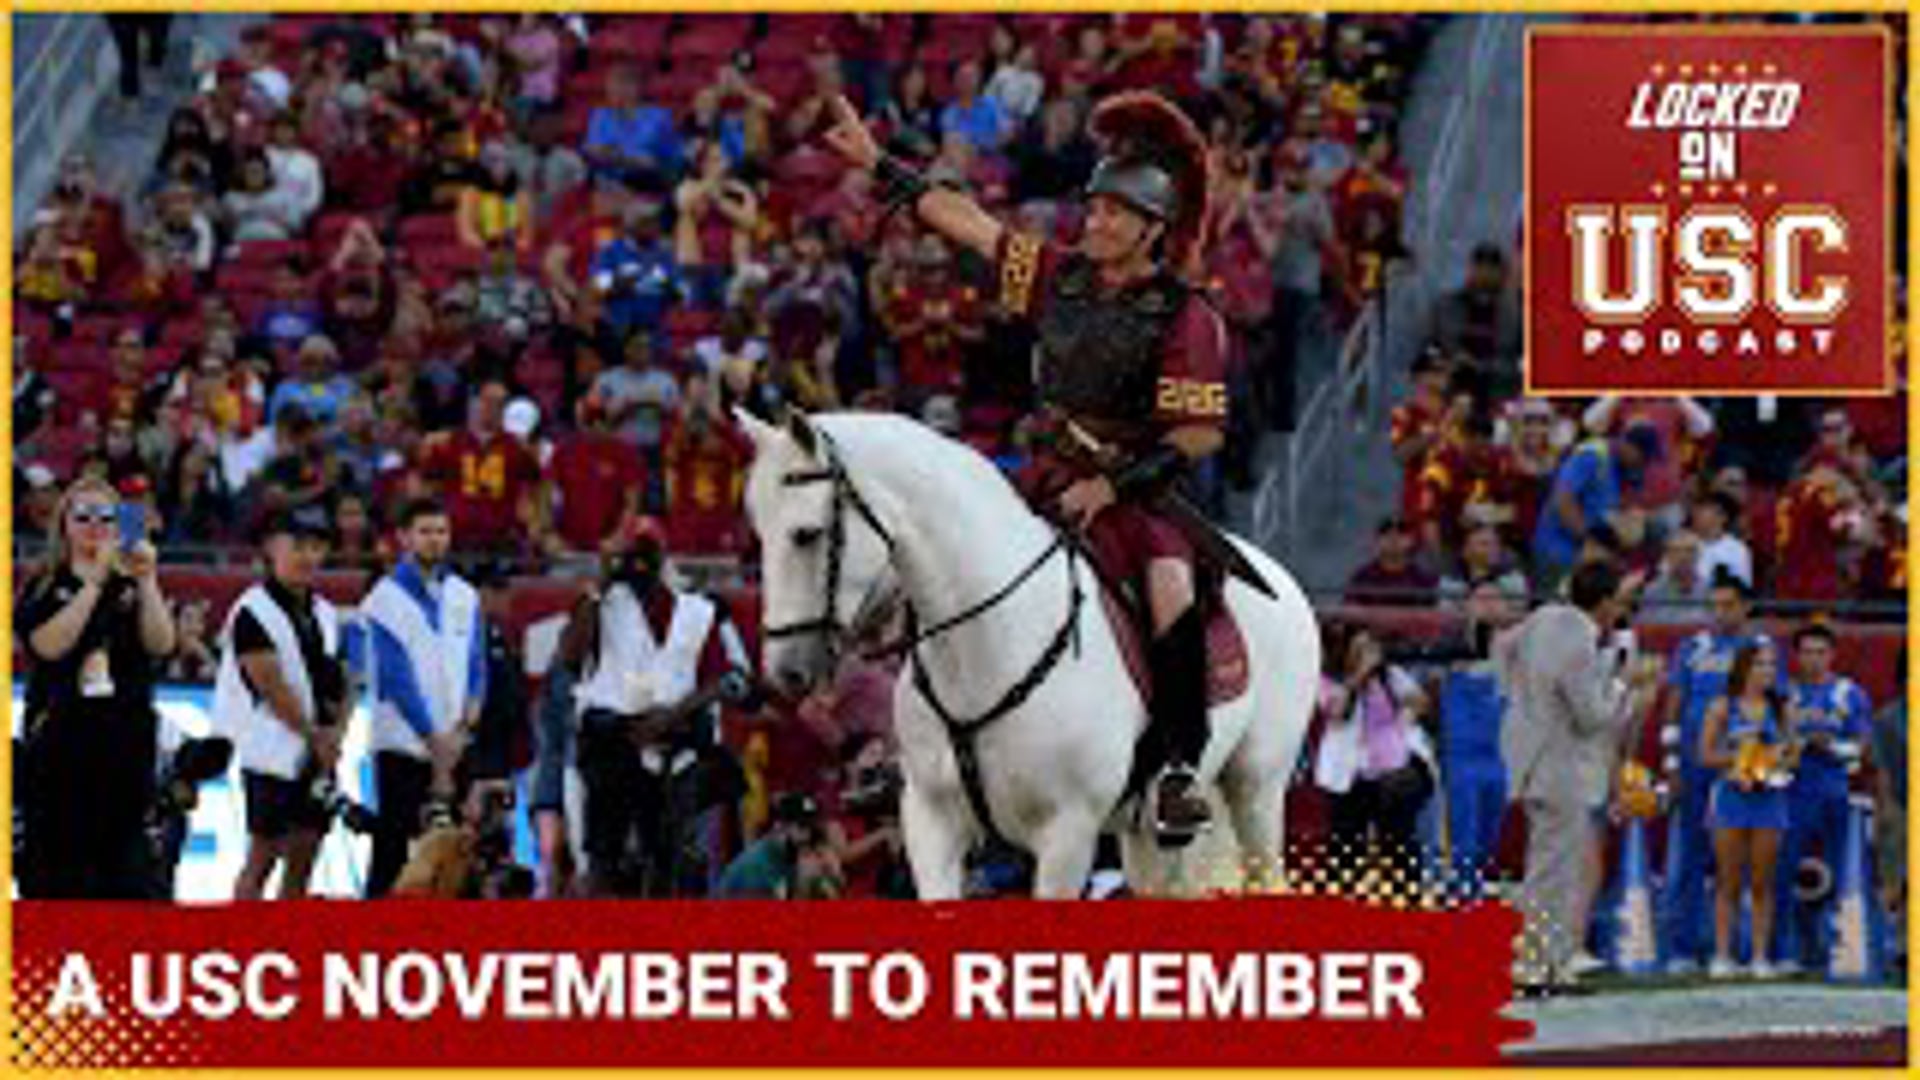 For USC football fans there is nothing better than playing meaningful games in November. If the Trojans start the season strong against two of top college programs.